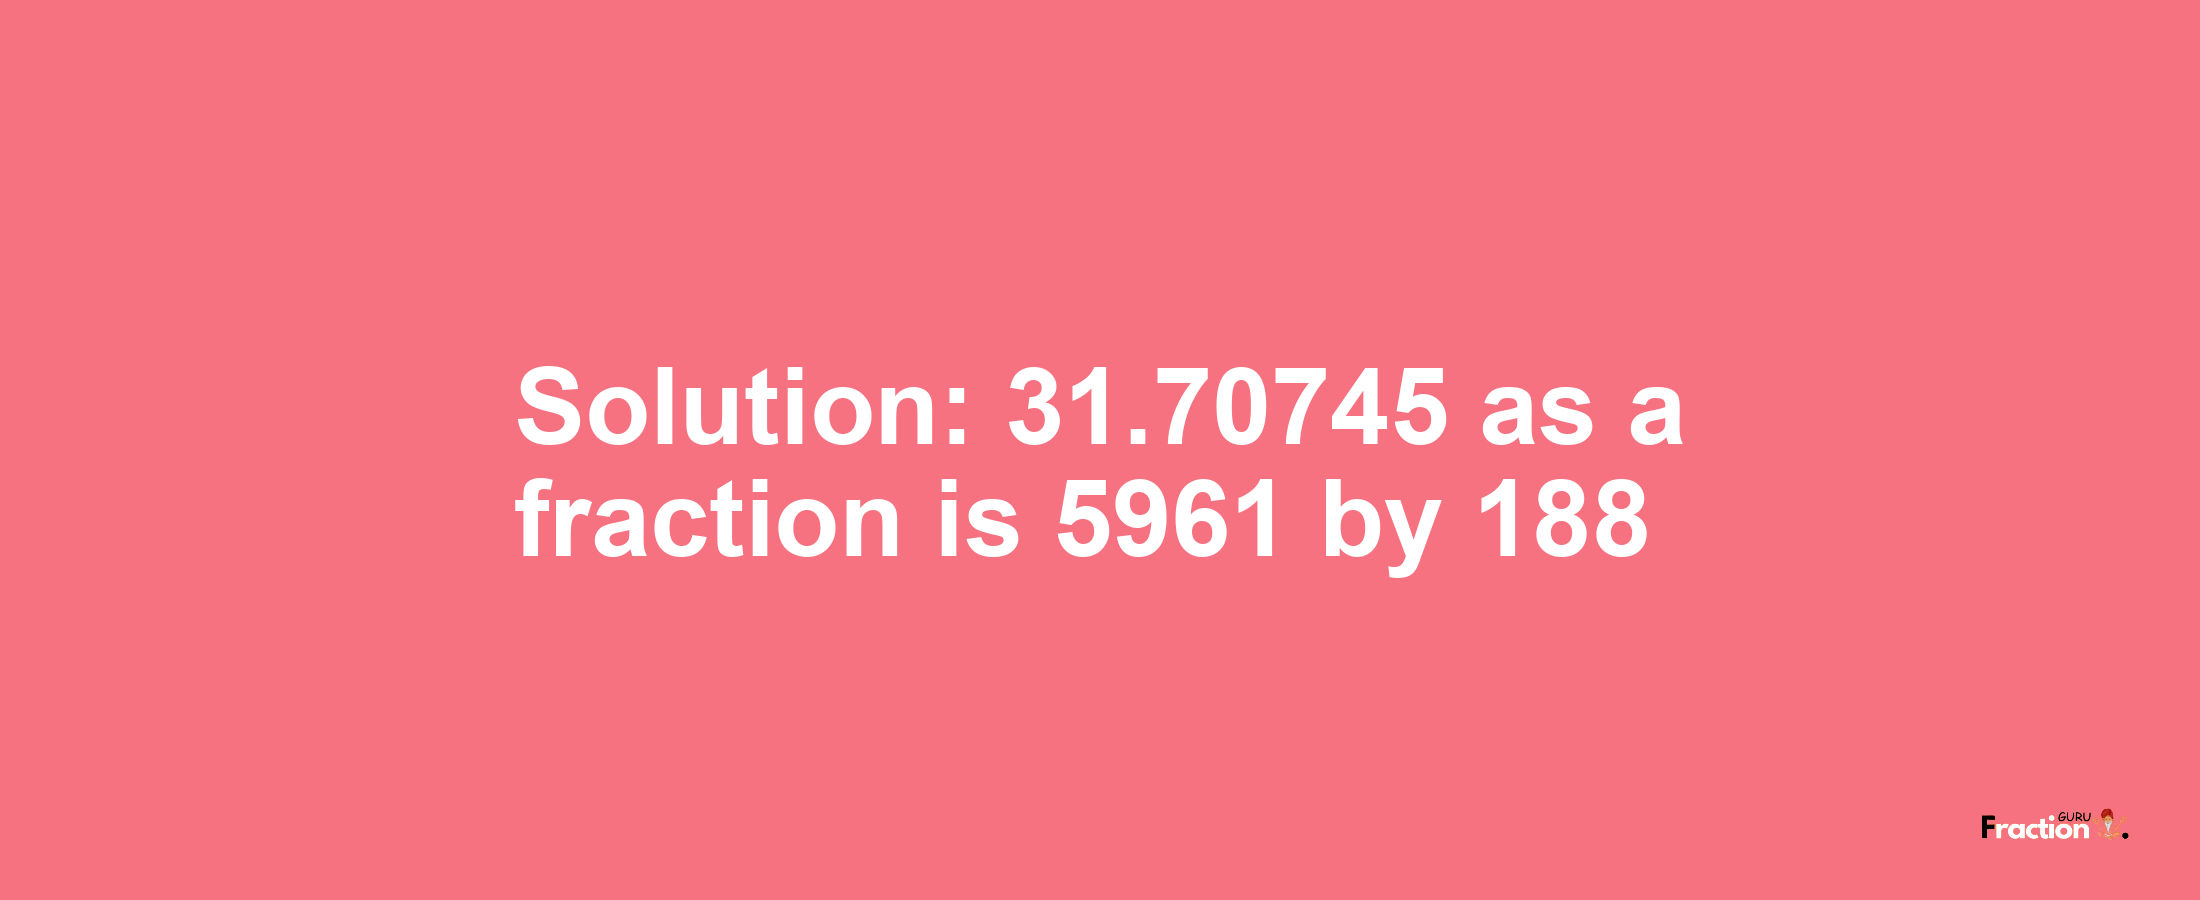 Solution:31.70745 as a fraction is 5961/188